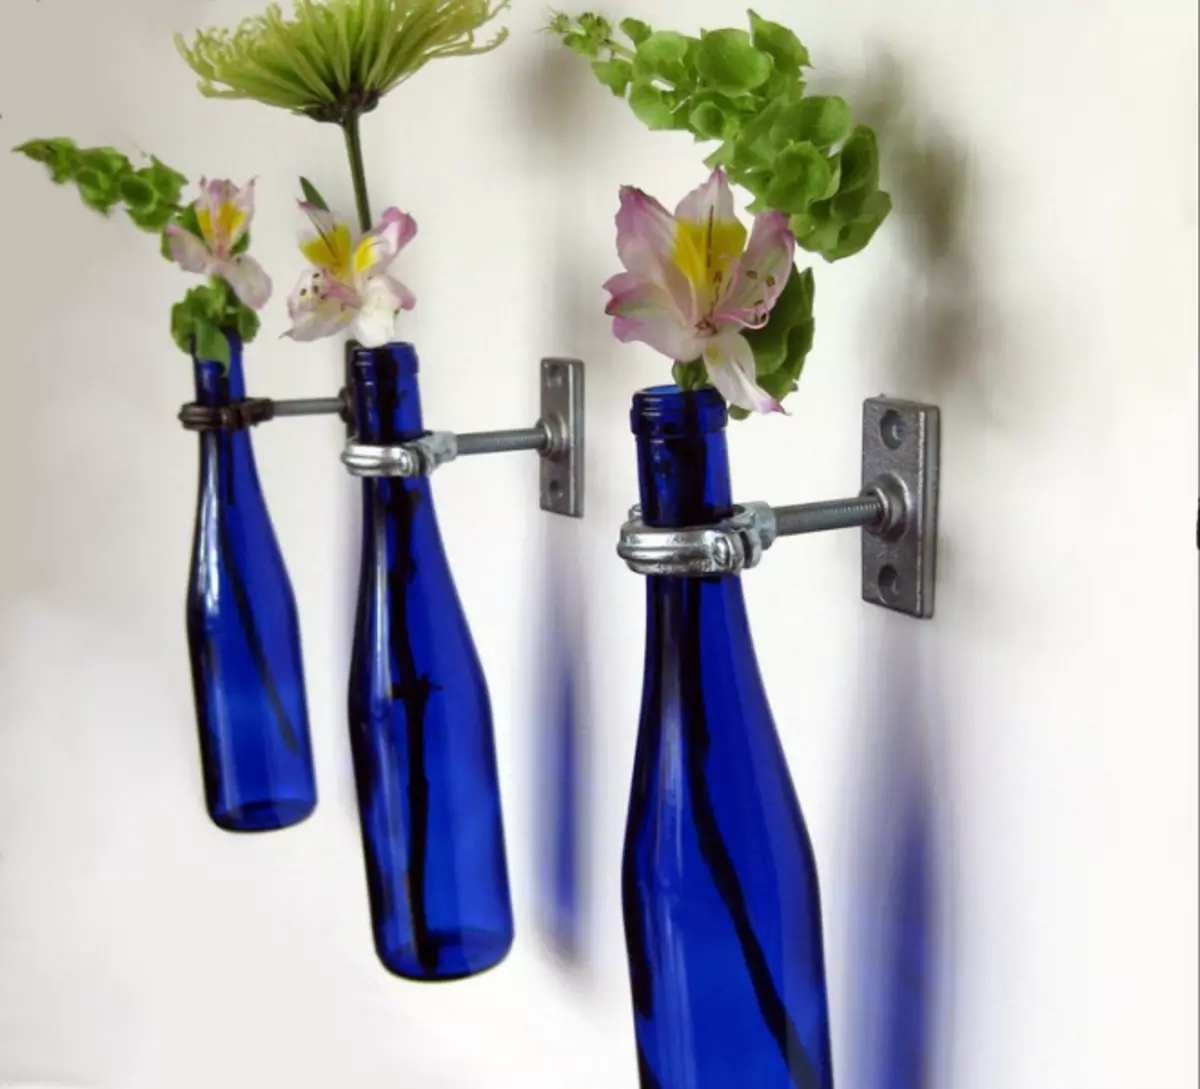 Crafts from glass bottles for home and summer cottages (36 photos)